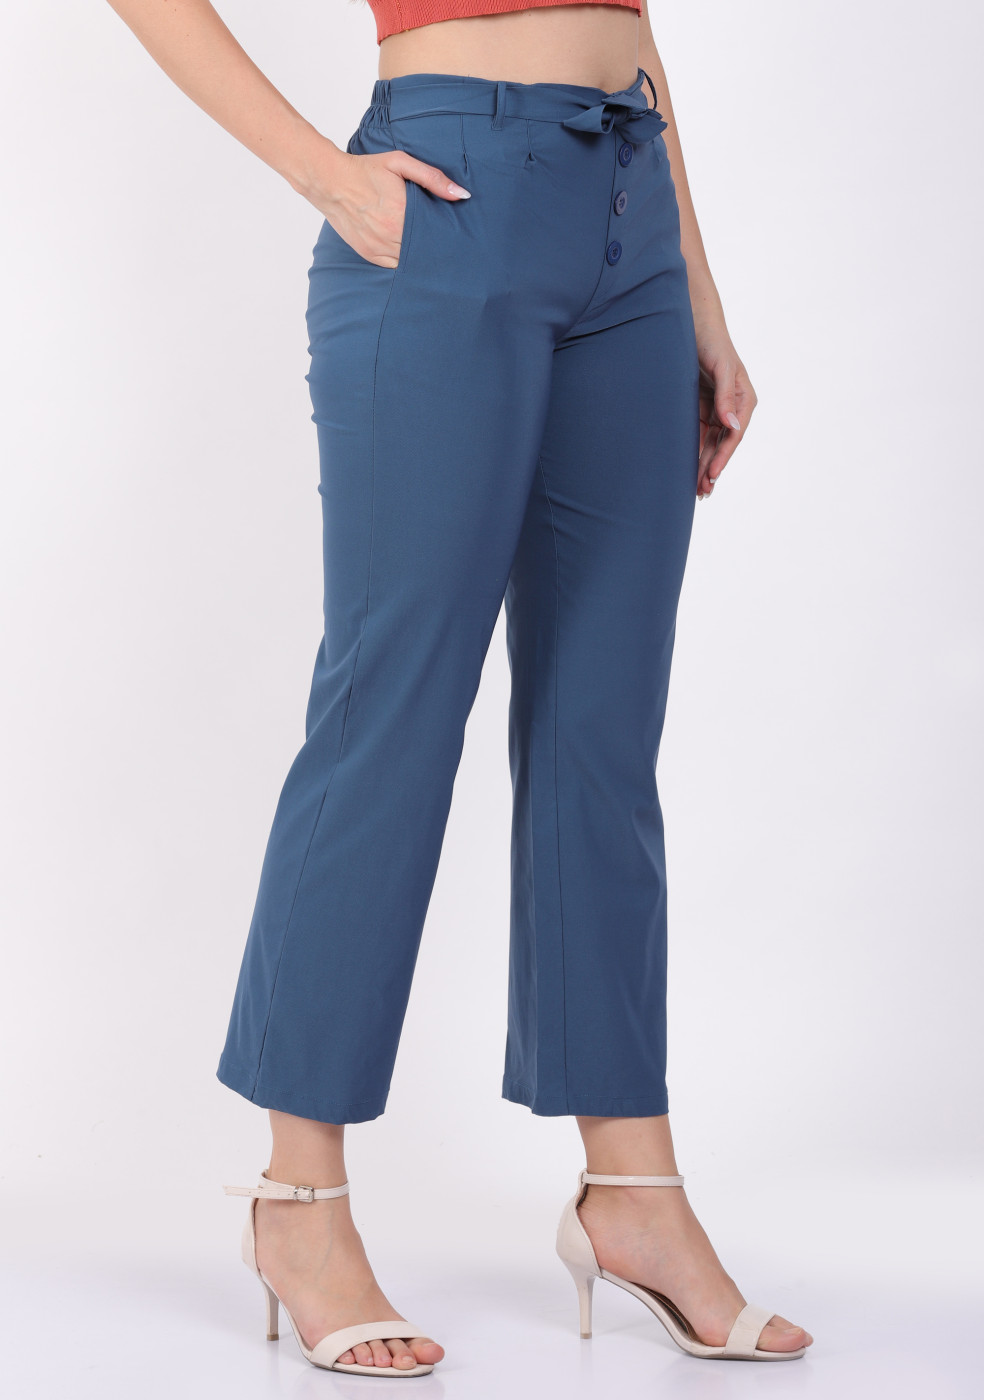 Shop Abienue Olive Cotton Lycra Pants by SOOTI STUDIO at House of Designers  – HOUSE OF DESIGNERS